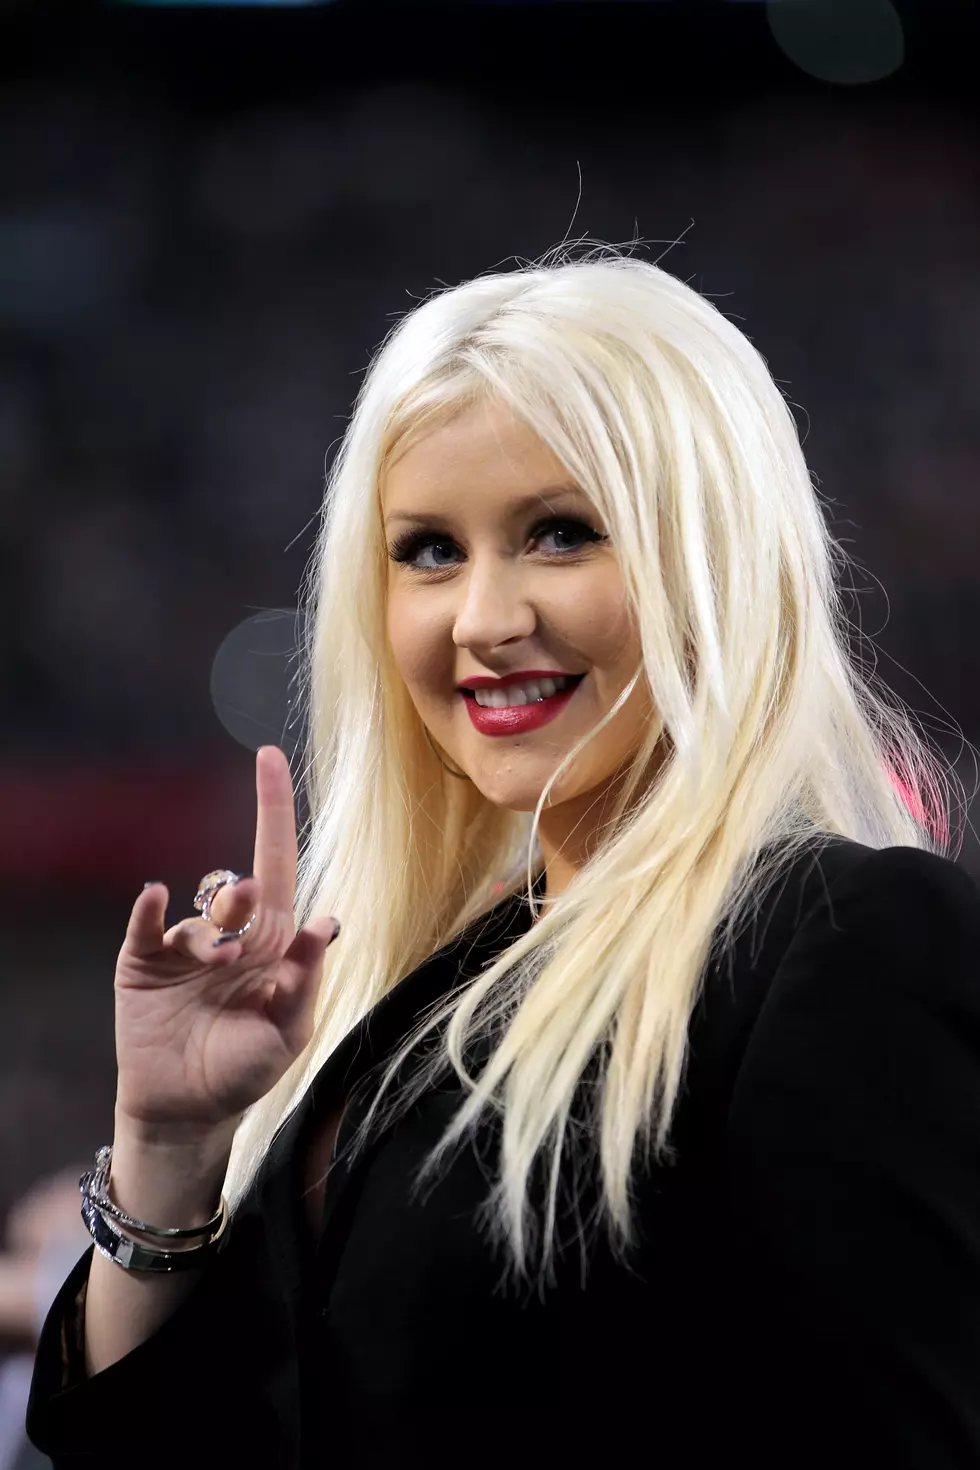 Christina Aguilera arrested for public drunkenness &#8211; Yahoo! News